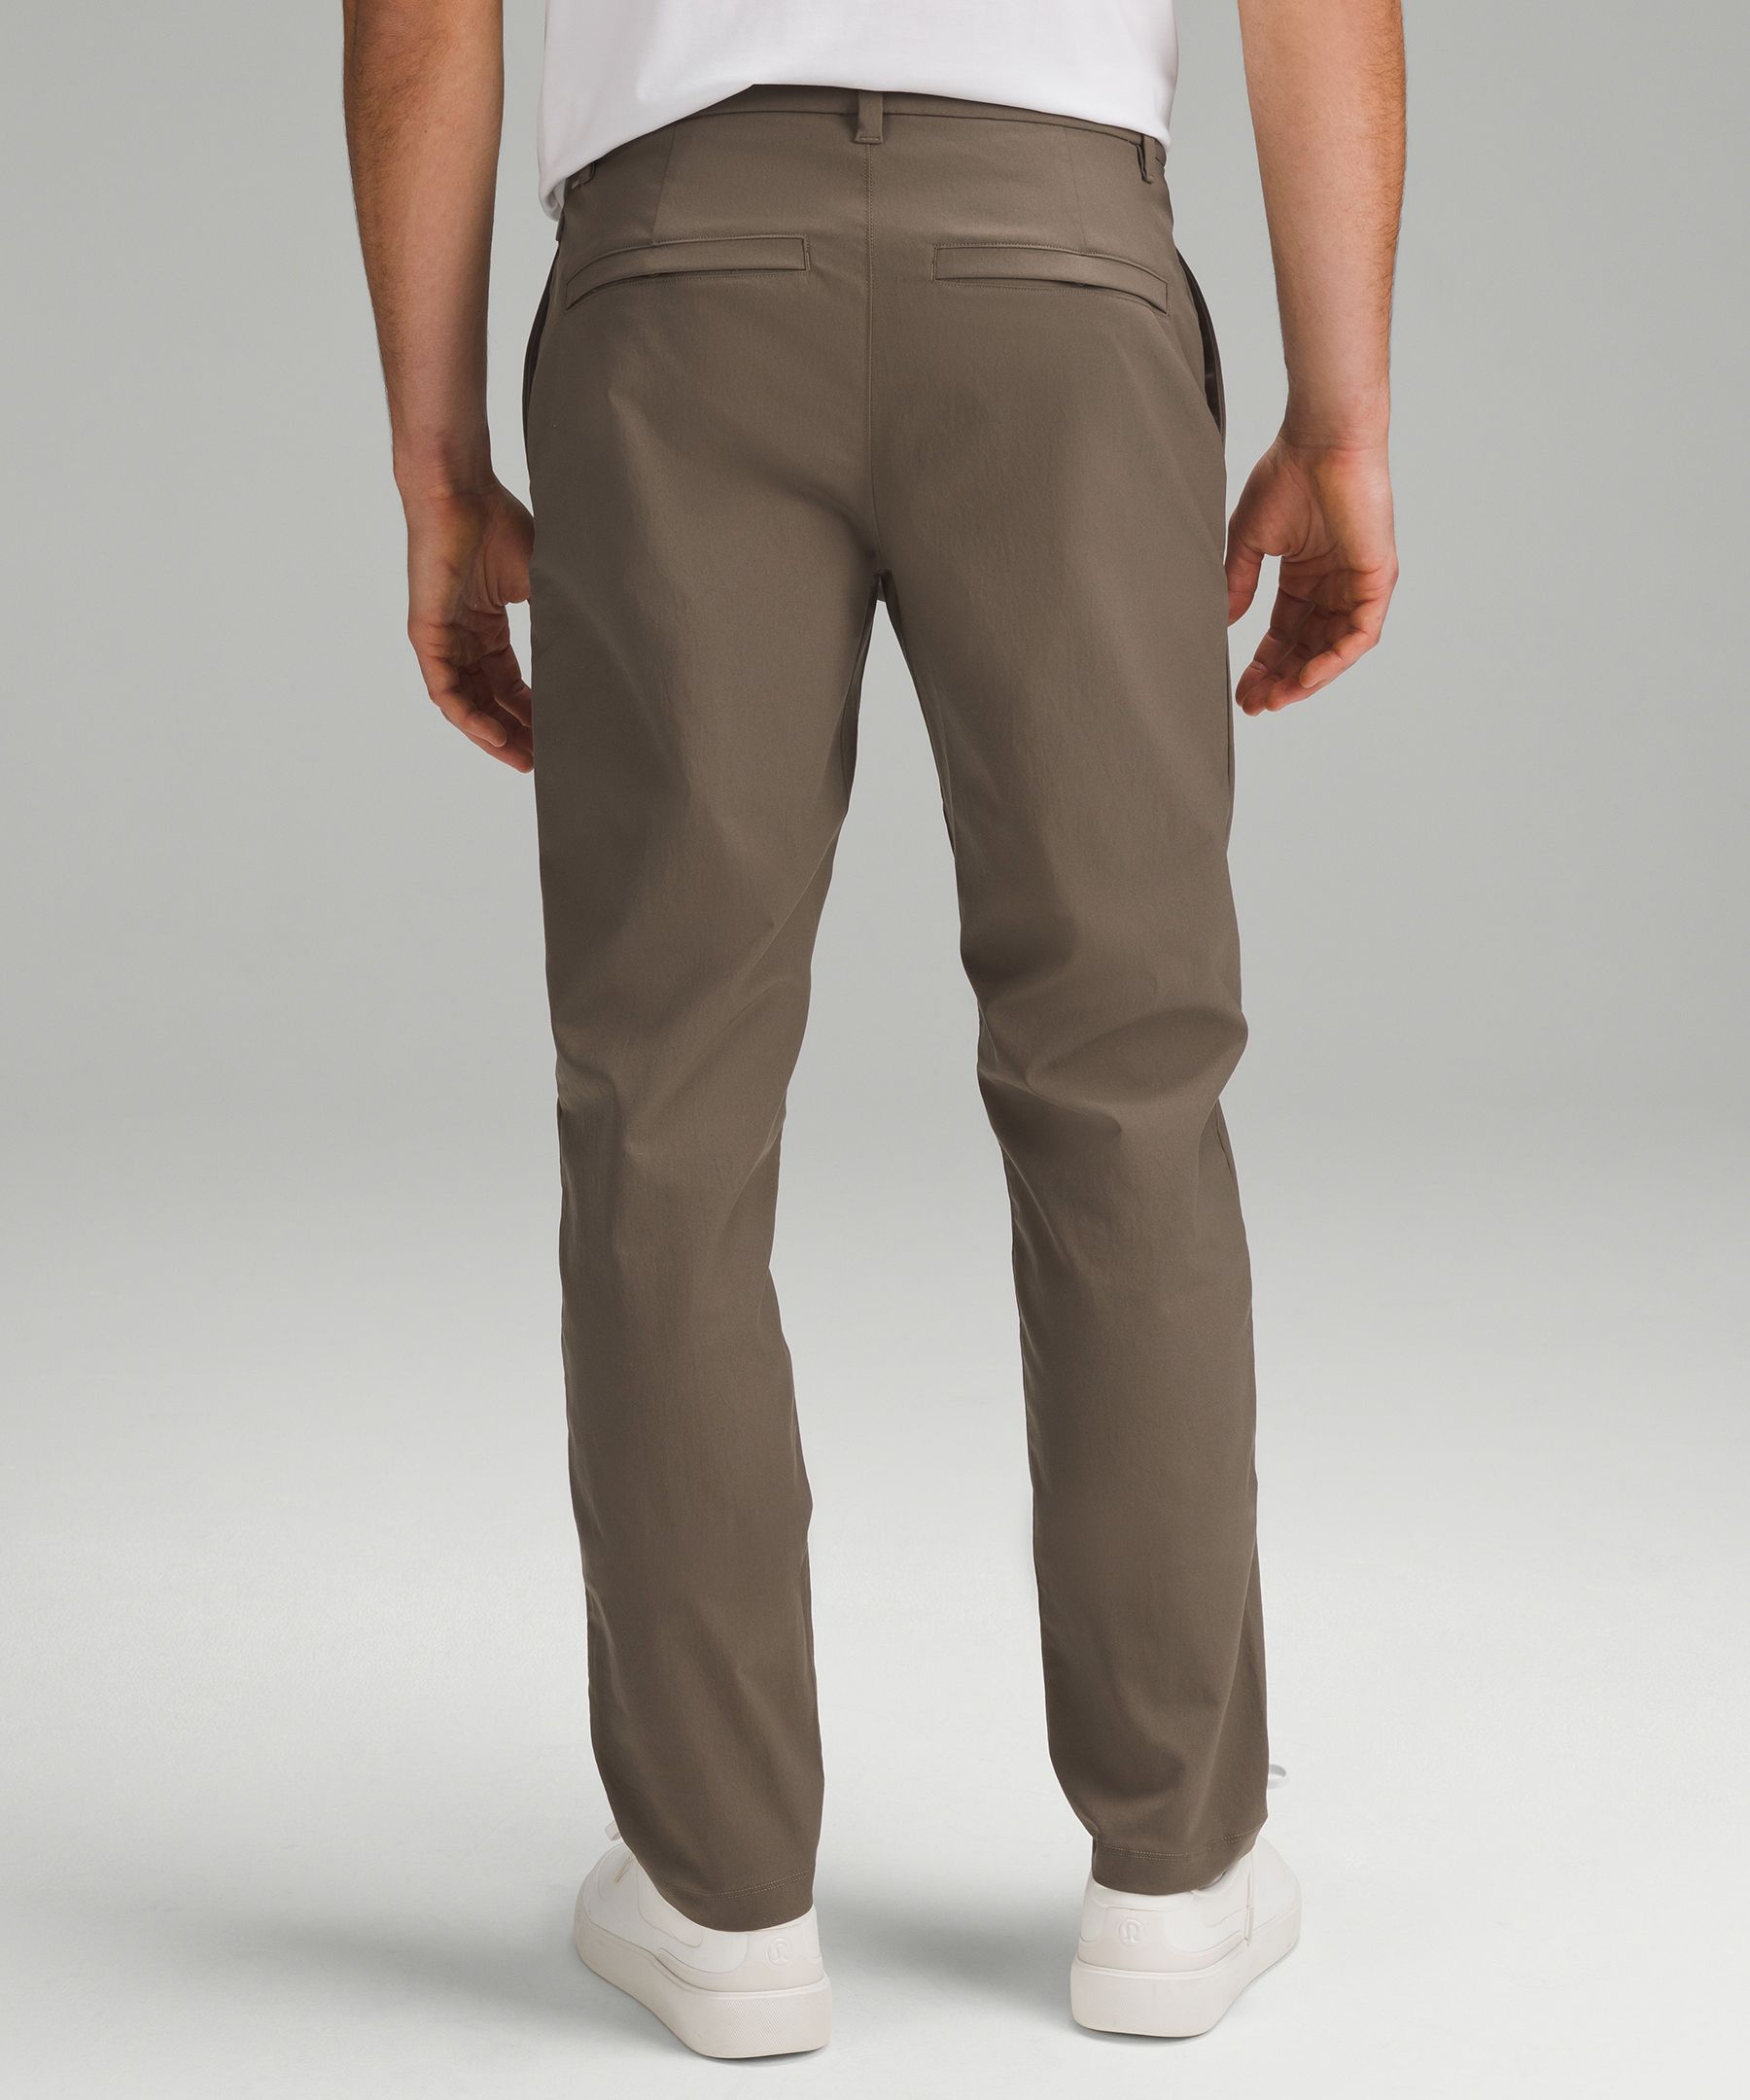 ABC Classic-Fit Trouser 30L *Smooth Twill